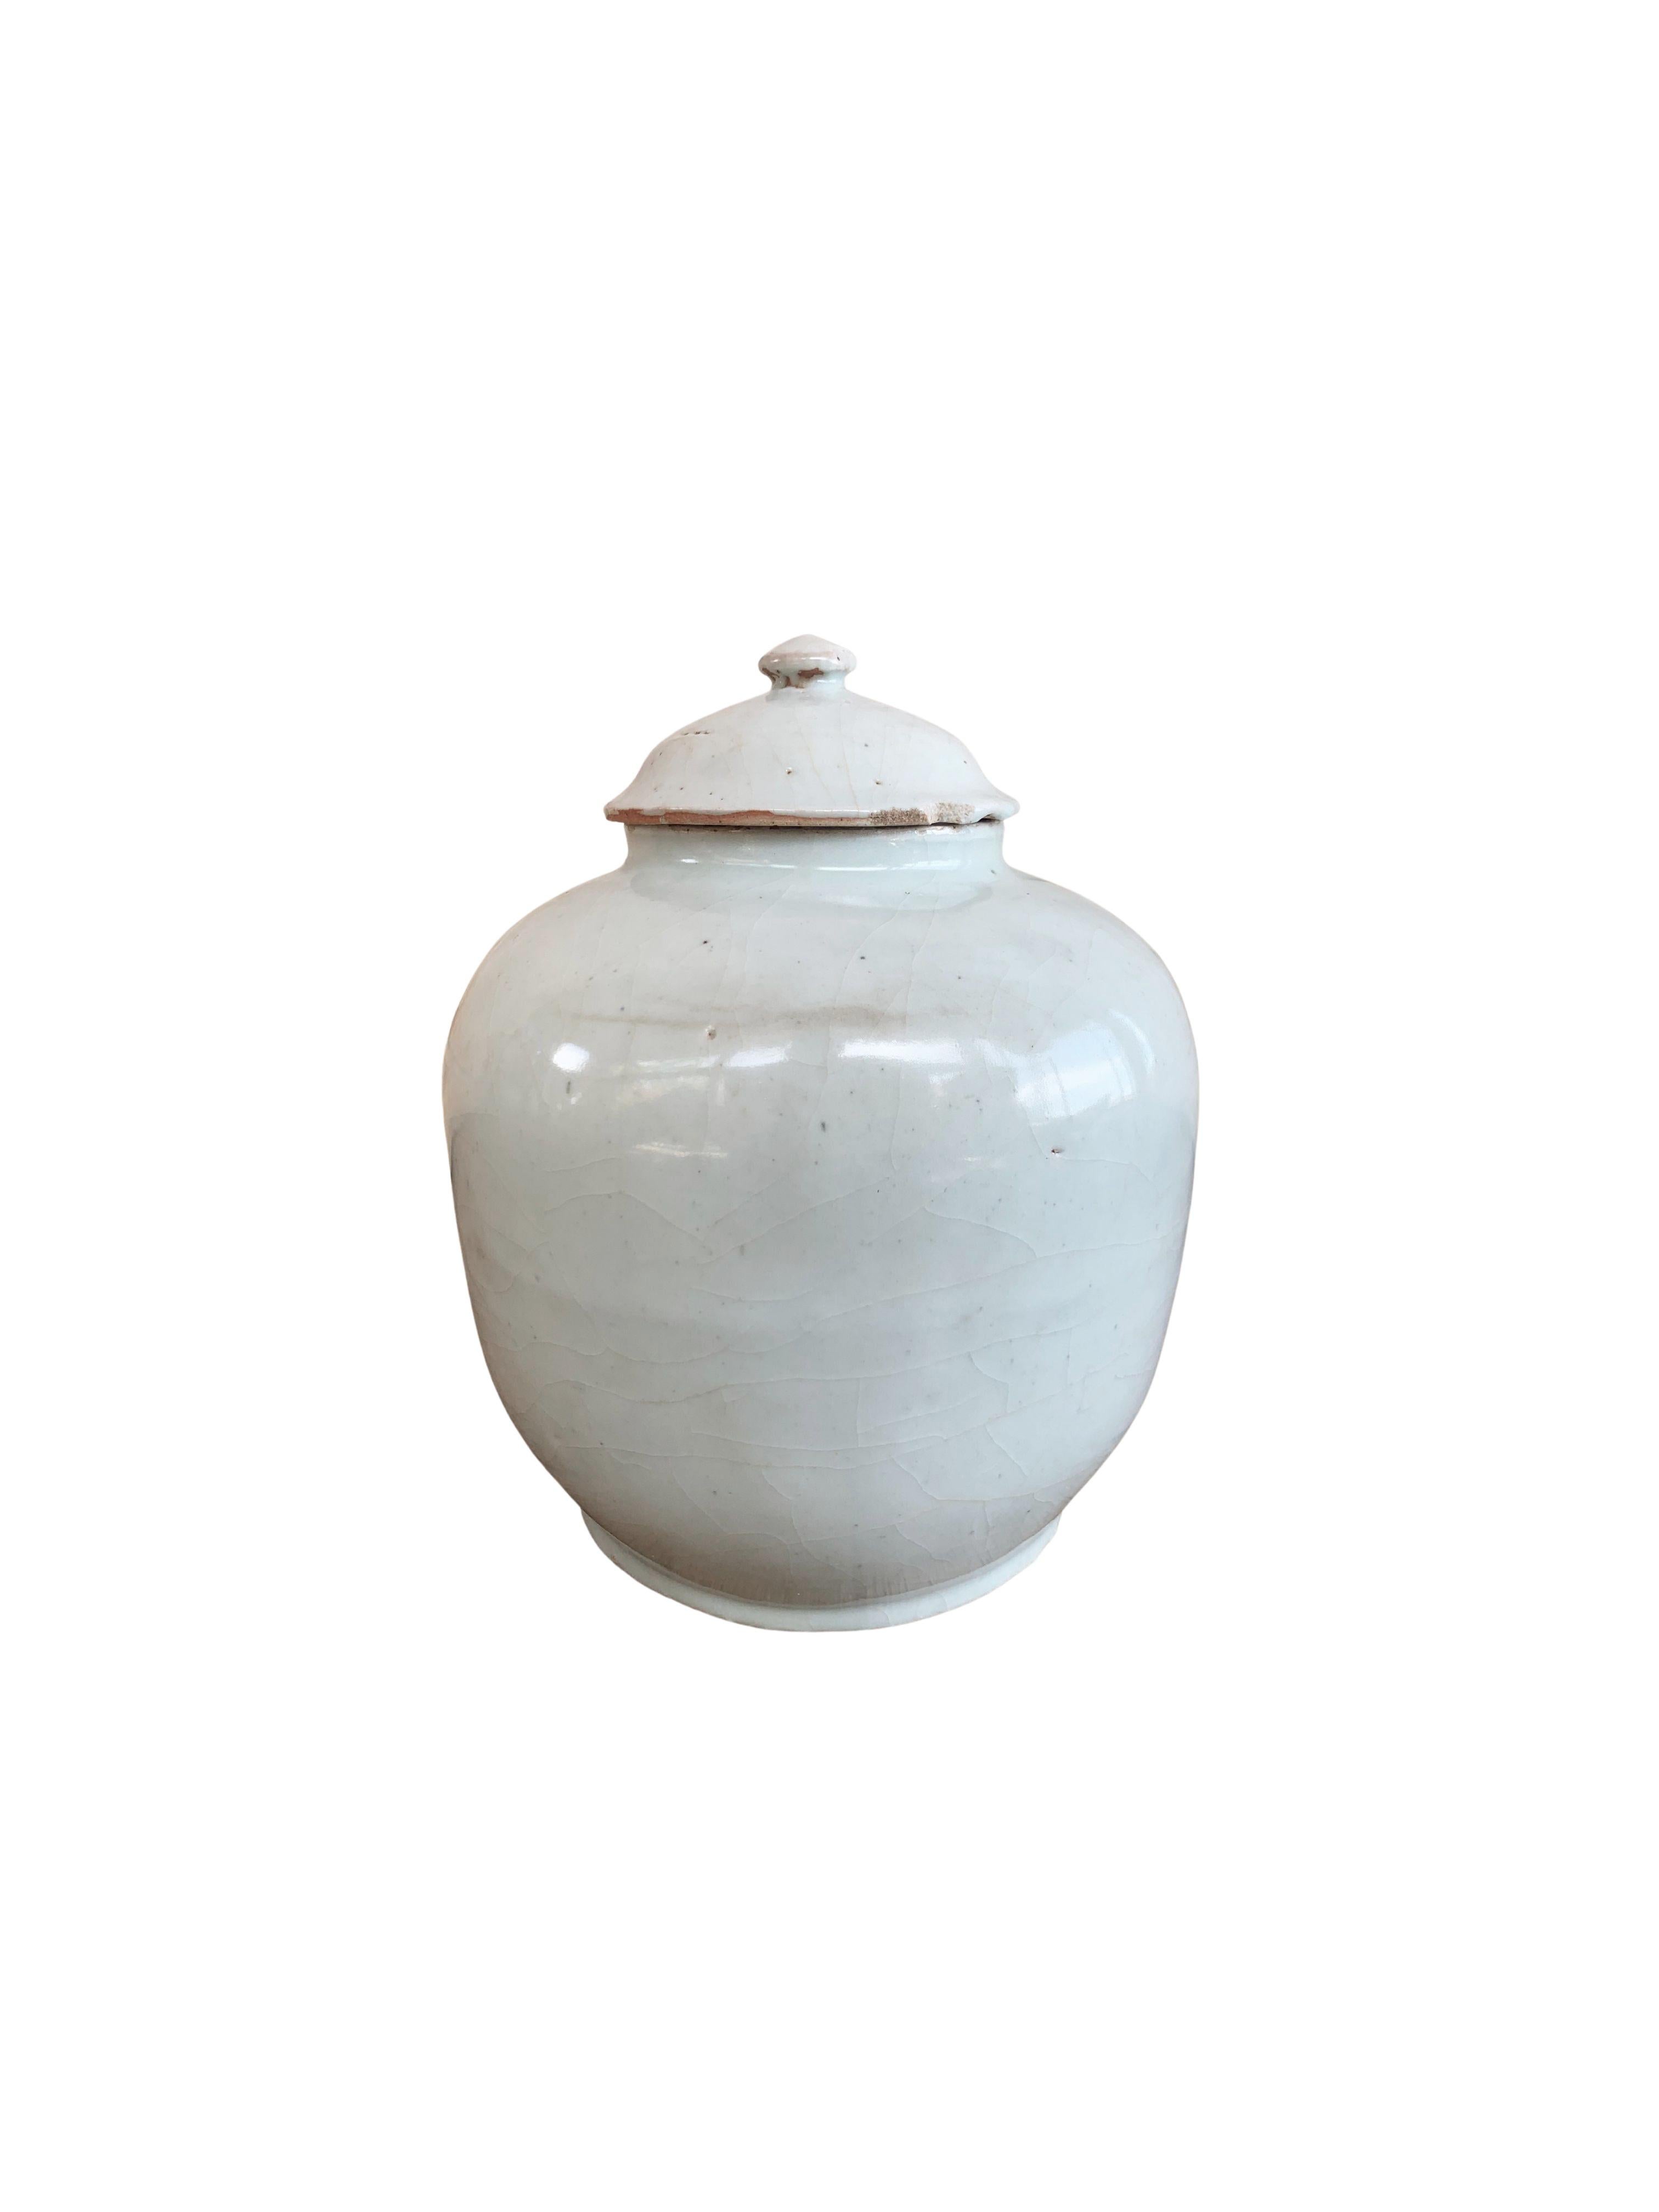 Other Chinese Off-White Ceramic Ginger Jar 